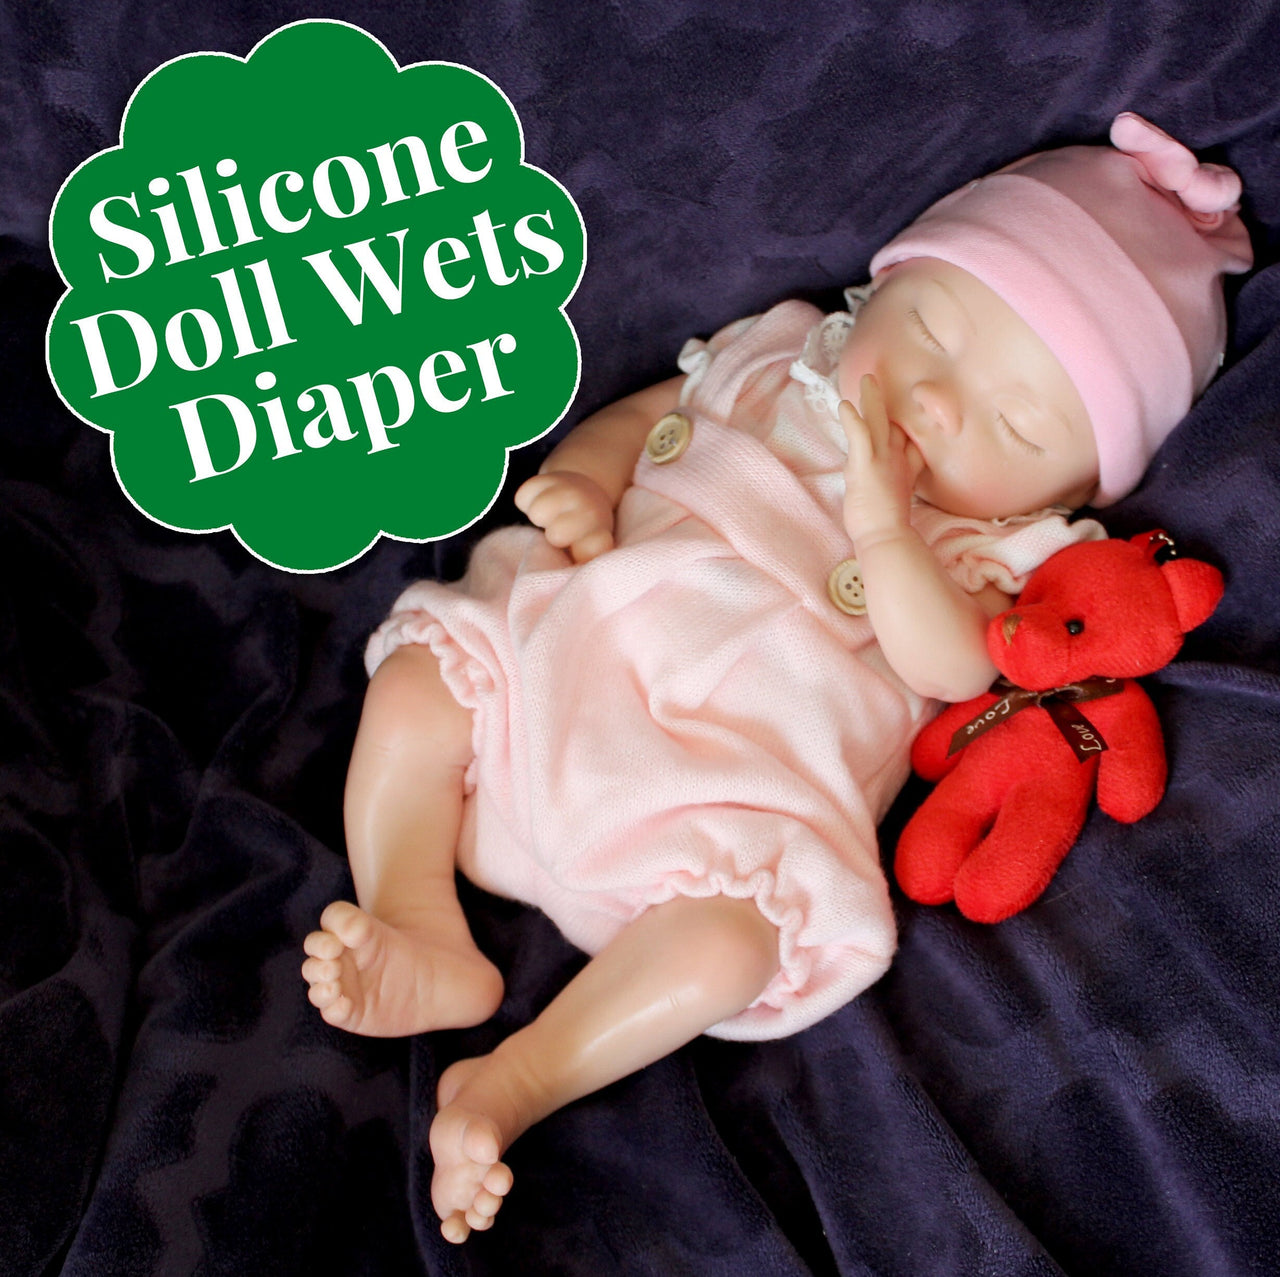 Drink and Wet Silicone Dolls Wet System Wets Diaper 13" Full Silicone Baby Doll Can Pee Diapers Realistic Real Lifelike 3lbs Dolls Bathtub